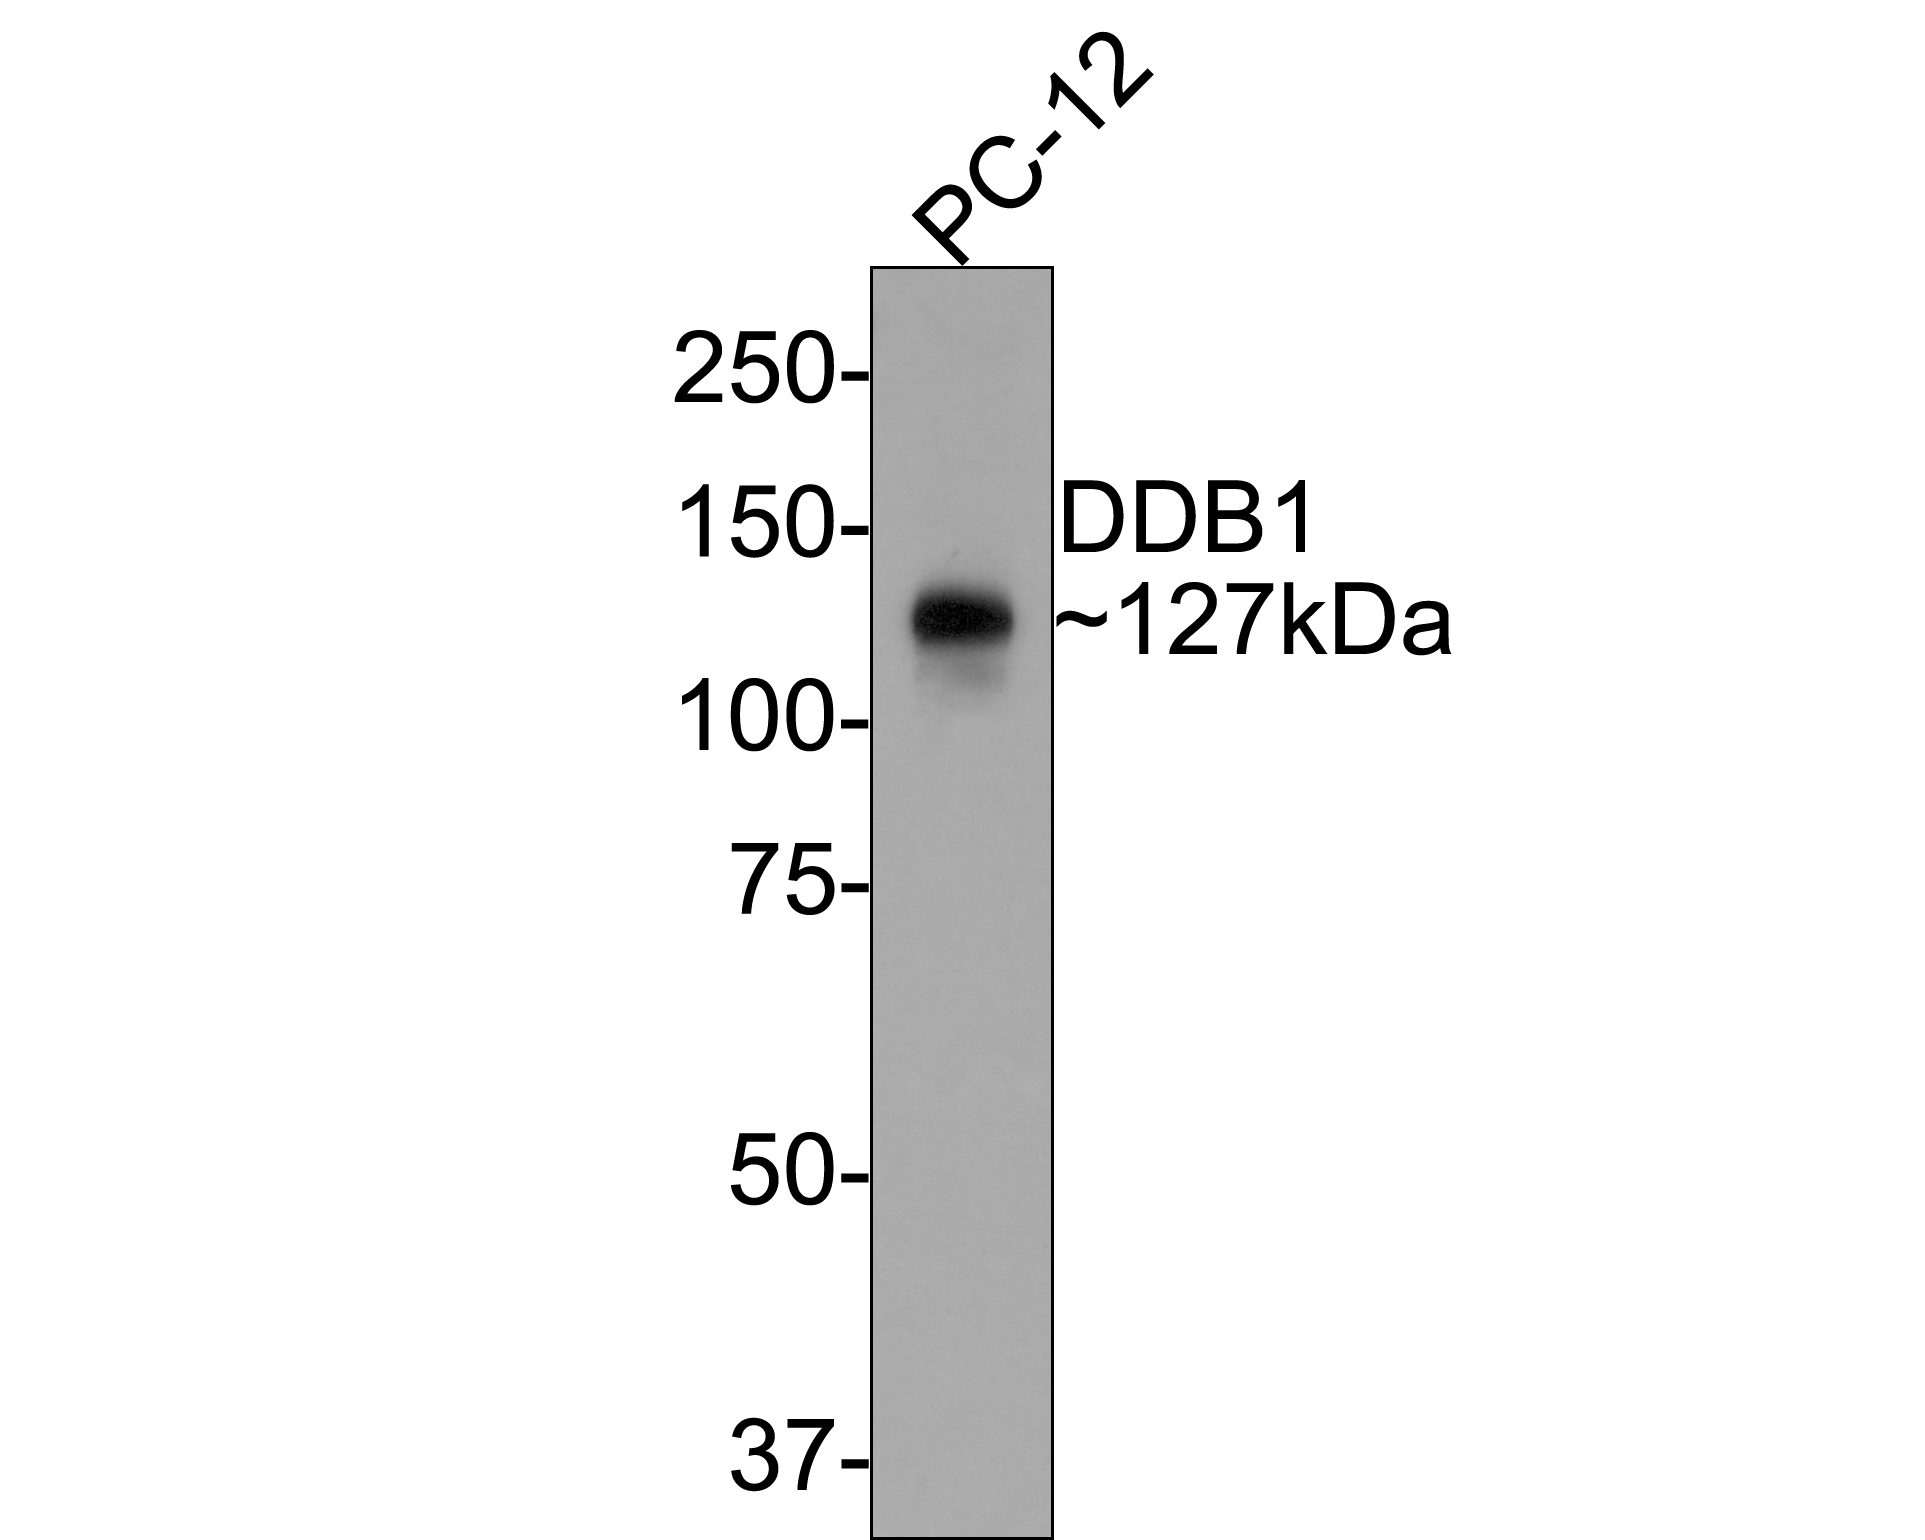 Western blot analysis of DDB1 on different lysates. Proteins were transferred to a PVDF membrane and blocked with 5% BSA in PBS for 1 hour at room temperature. The primary antibody (ET1706-22, 1/500) was used in 5% BSA at room temperature for 2 hours. Goat Anti-Rabbit IgG - HRP Secondary Antibody (HA1001) at 1:200,000 dilution was used for 1 hour at room temperature.<br />
Positive control: <br />
Lane 1: HepG2 cell lysate<br />
Lane 2: NIH/3T3 cell lysate<br />
Lane 3: MCF-7 cell lysate<br />
Lane 4: Rat kidney tissue lysate